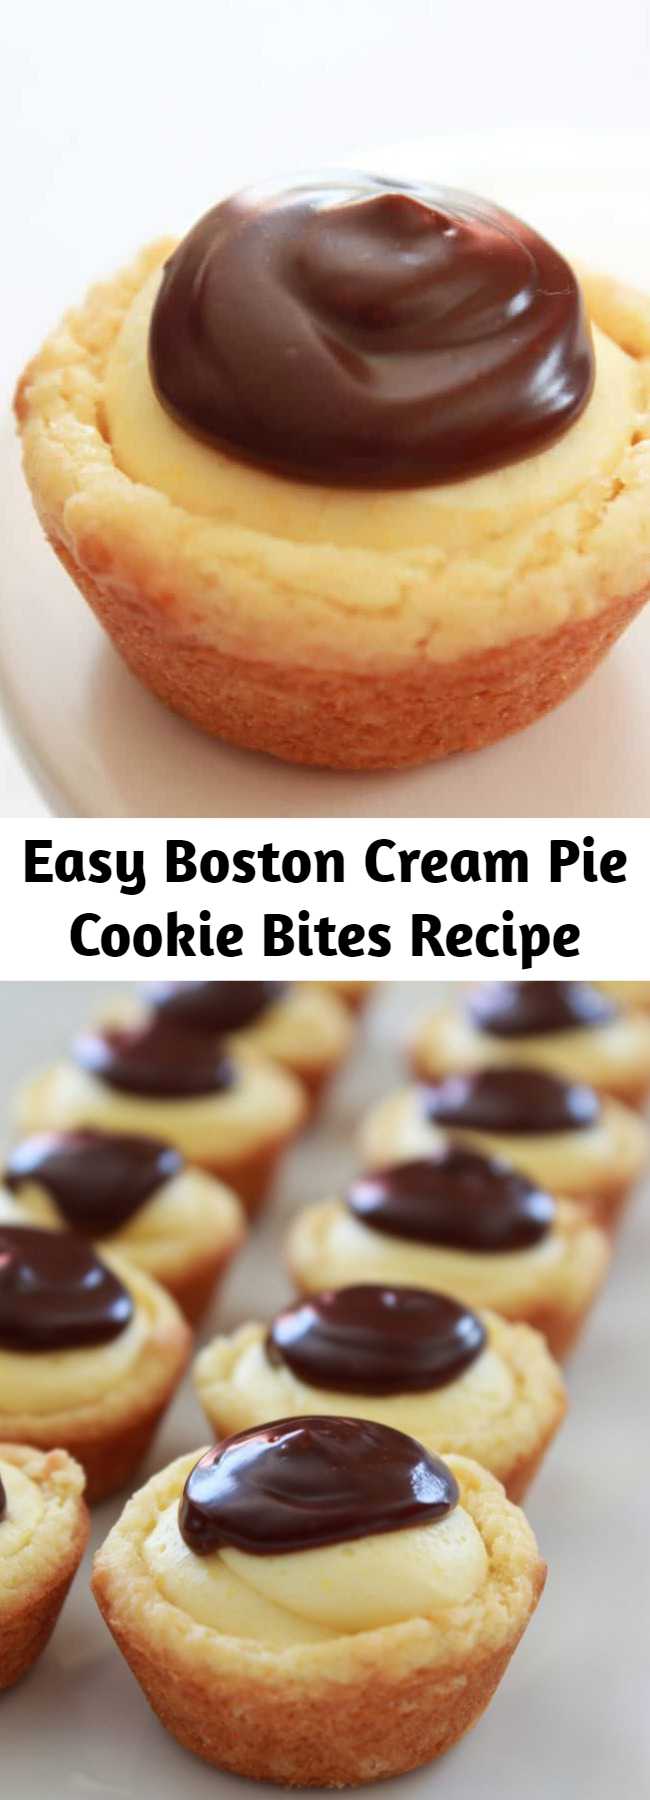 Easy Boston Cream Pie Cookie Bites Recipe - All of the awesome flavors you love from the traditional Boston Cream Pie are turned into a cookie cup.  They are quick to make, starting with a cake mix and taste delicious. Everyone will go crazy for these little cuties.